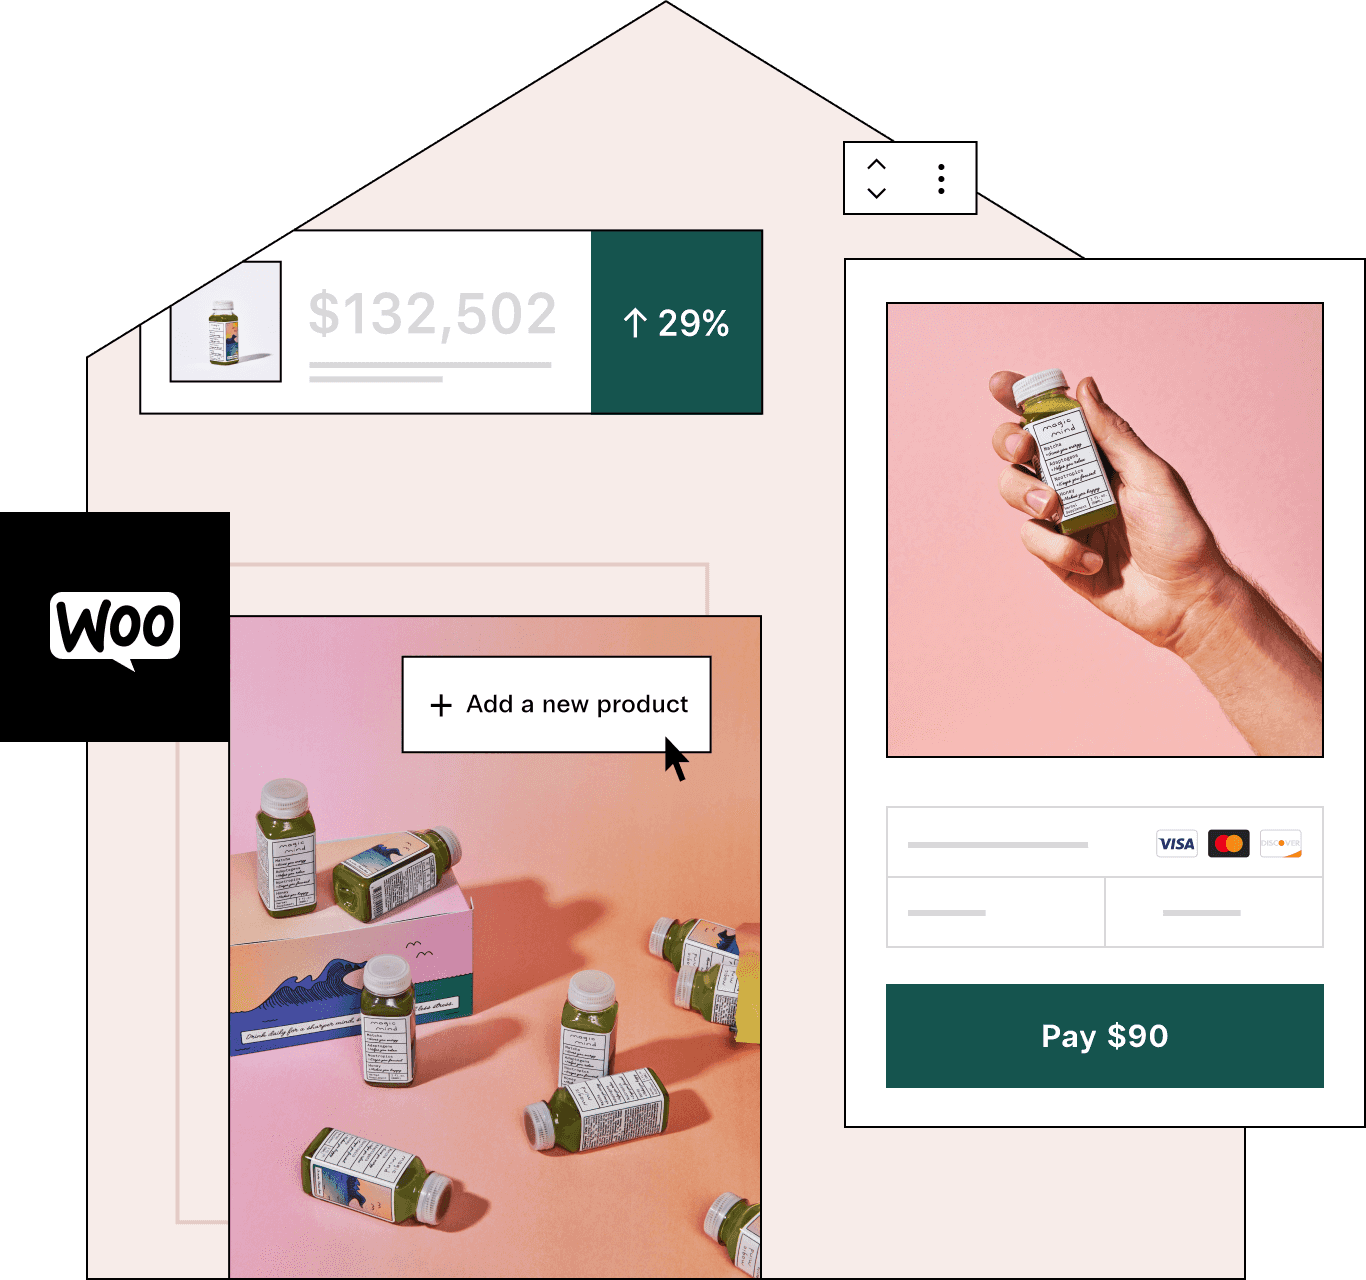 A store owner sells supplement drinks with managed WooCommerce hosting. Within the shape of a house, examples of checkout, add a new product, and $132,502 in revenue